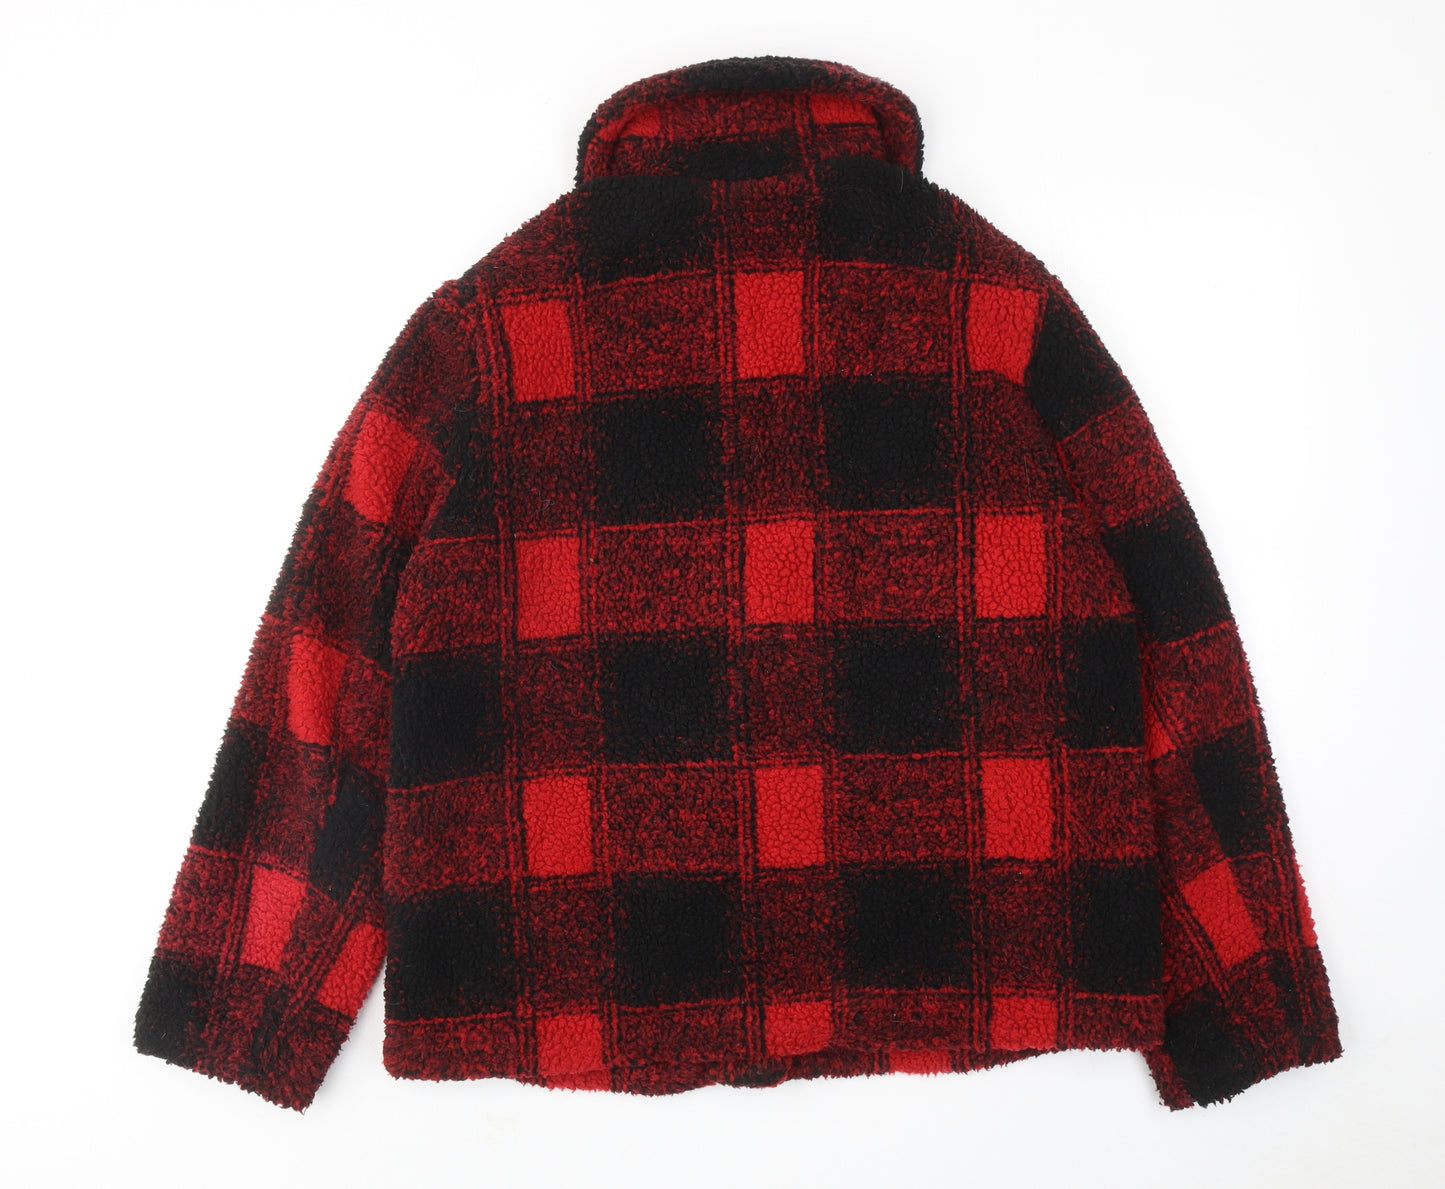 NEXT Womens Red Plaid Jacket Size 14 Button